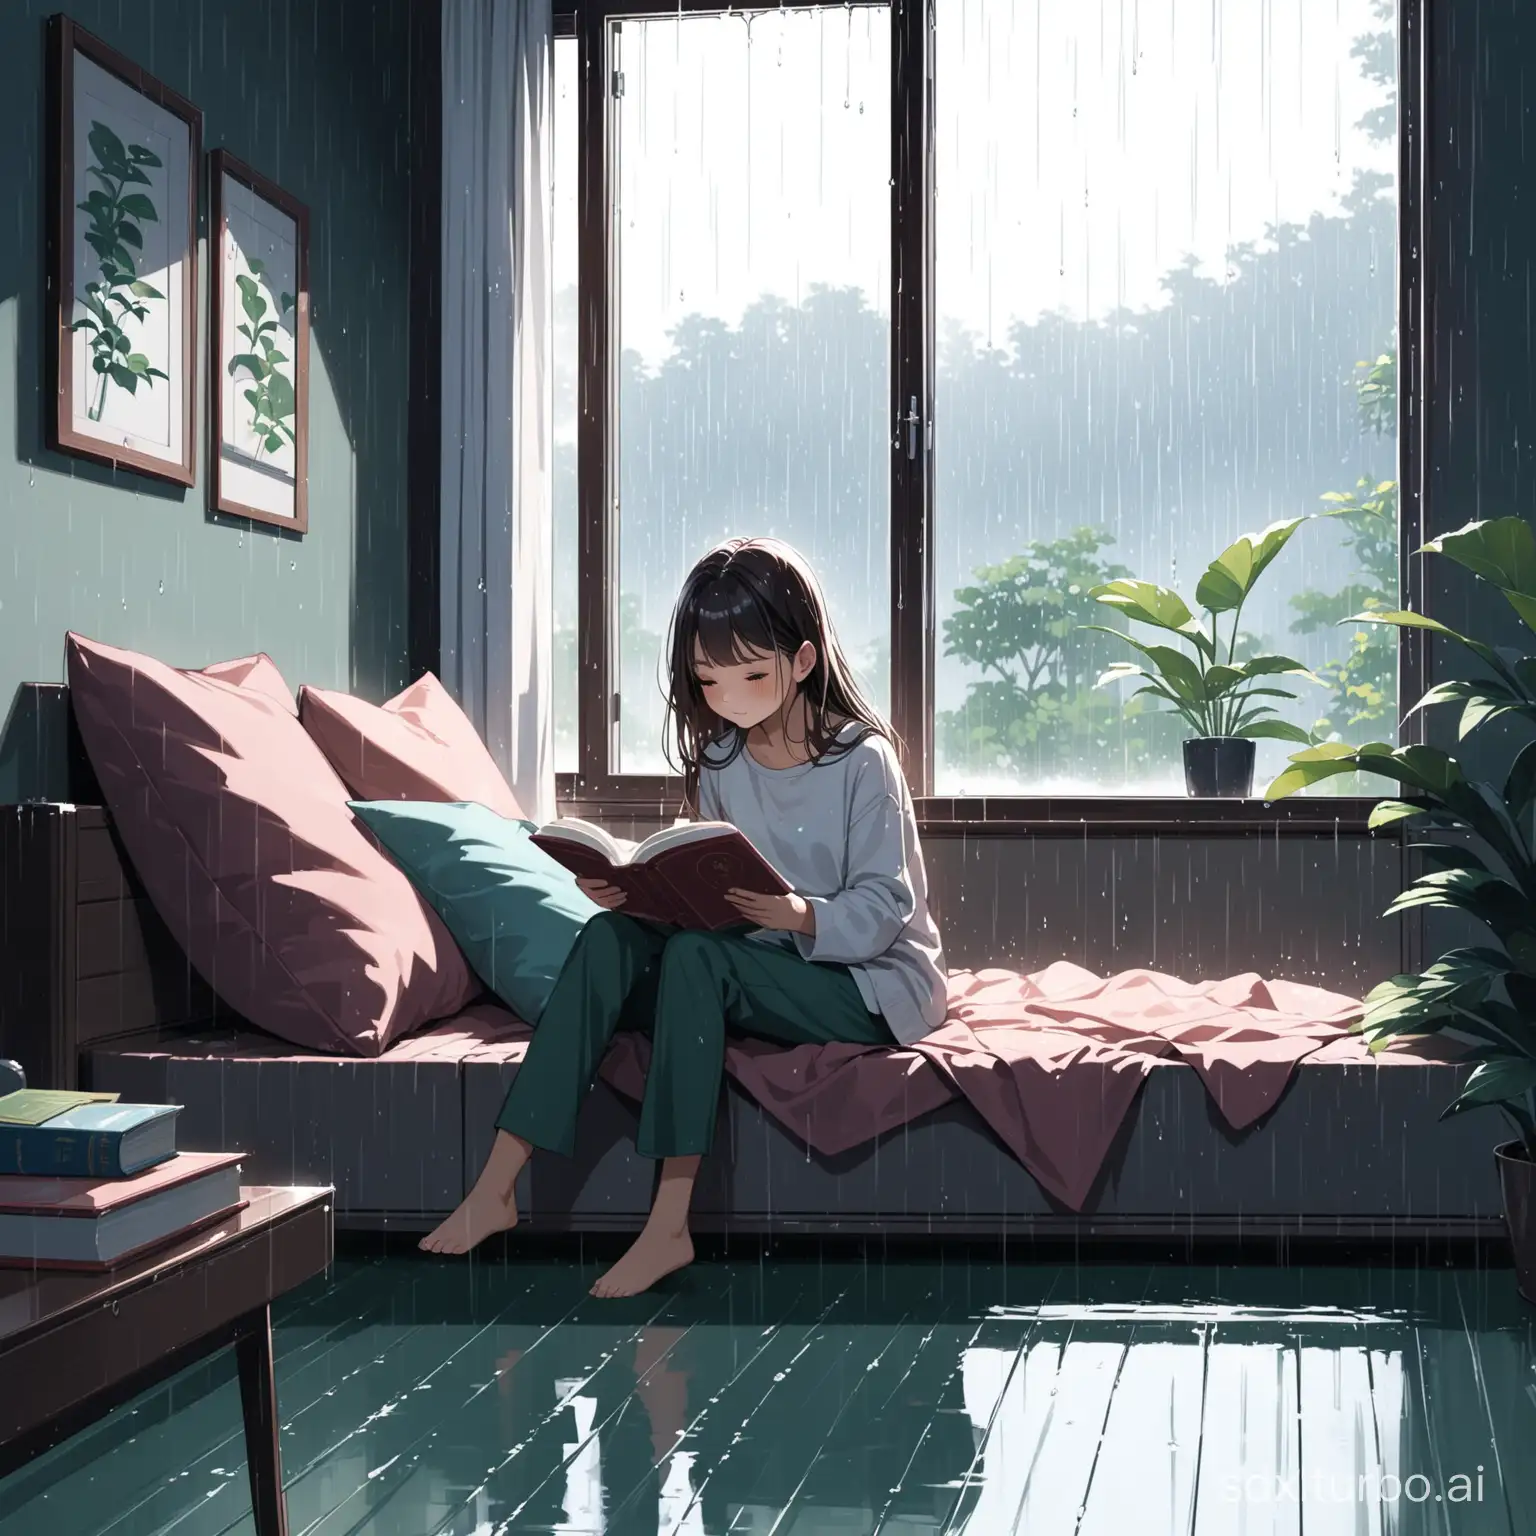 The girl is reading alone at home, and it's raining outside.